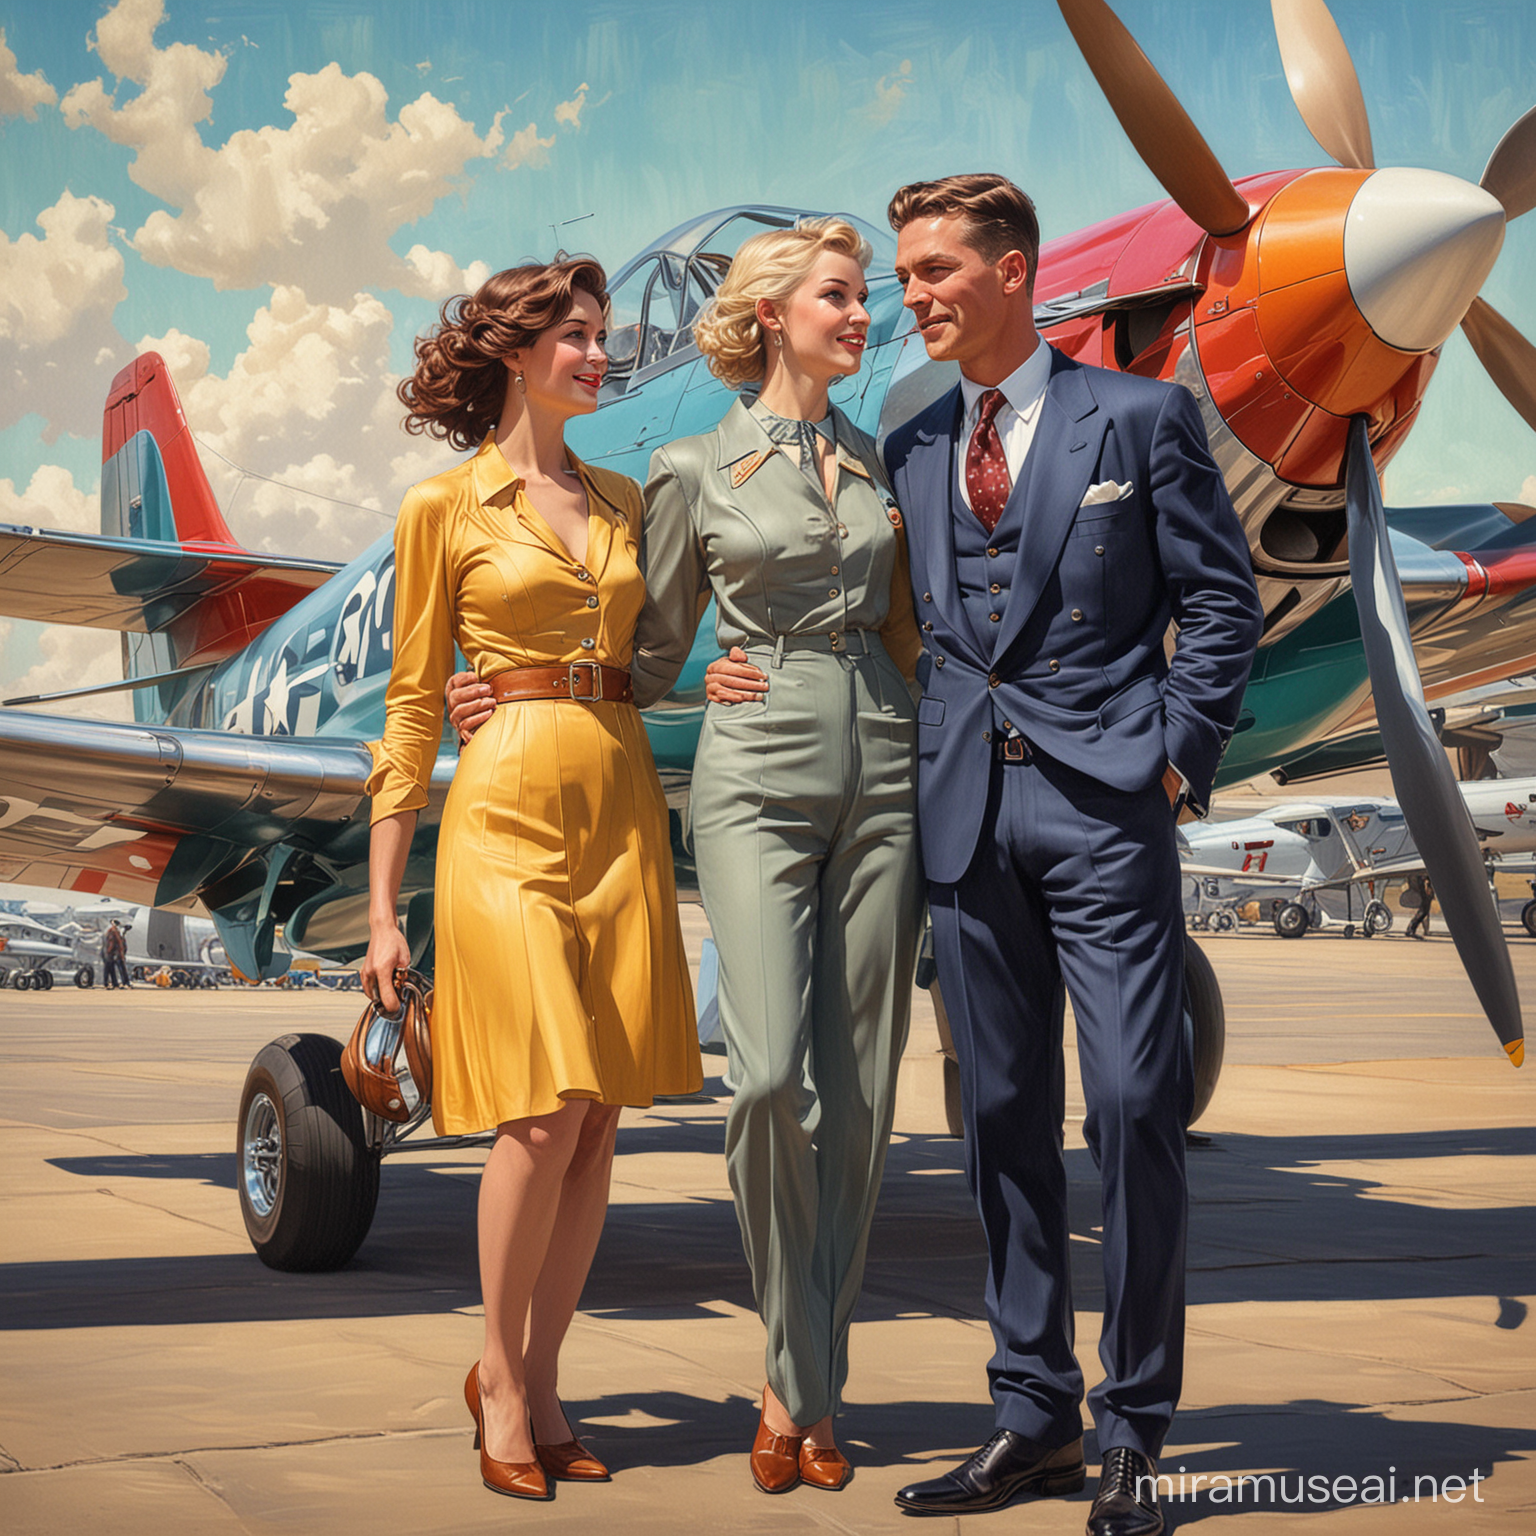 art nouveau, vintage aviation couple, colorful, mustang aircraft in background 